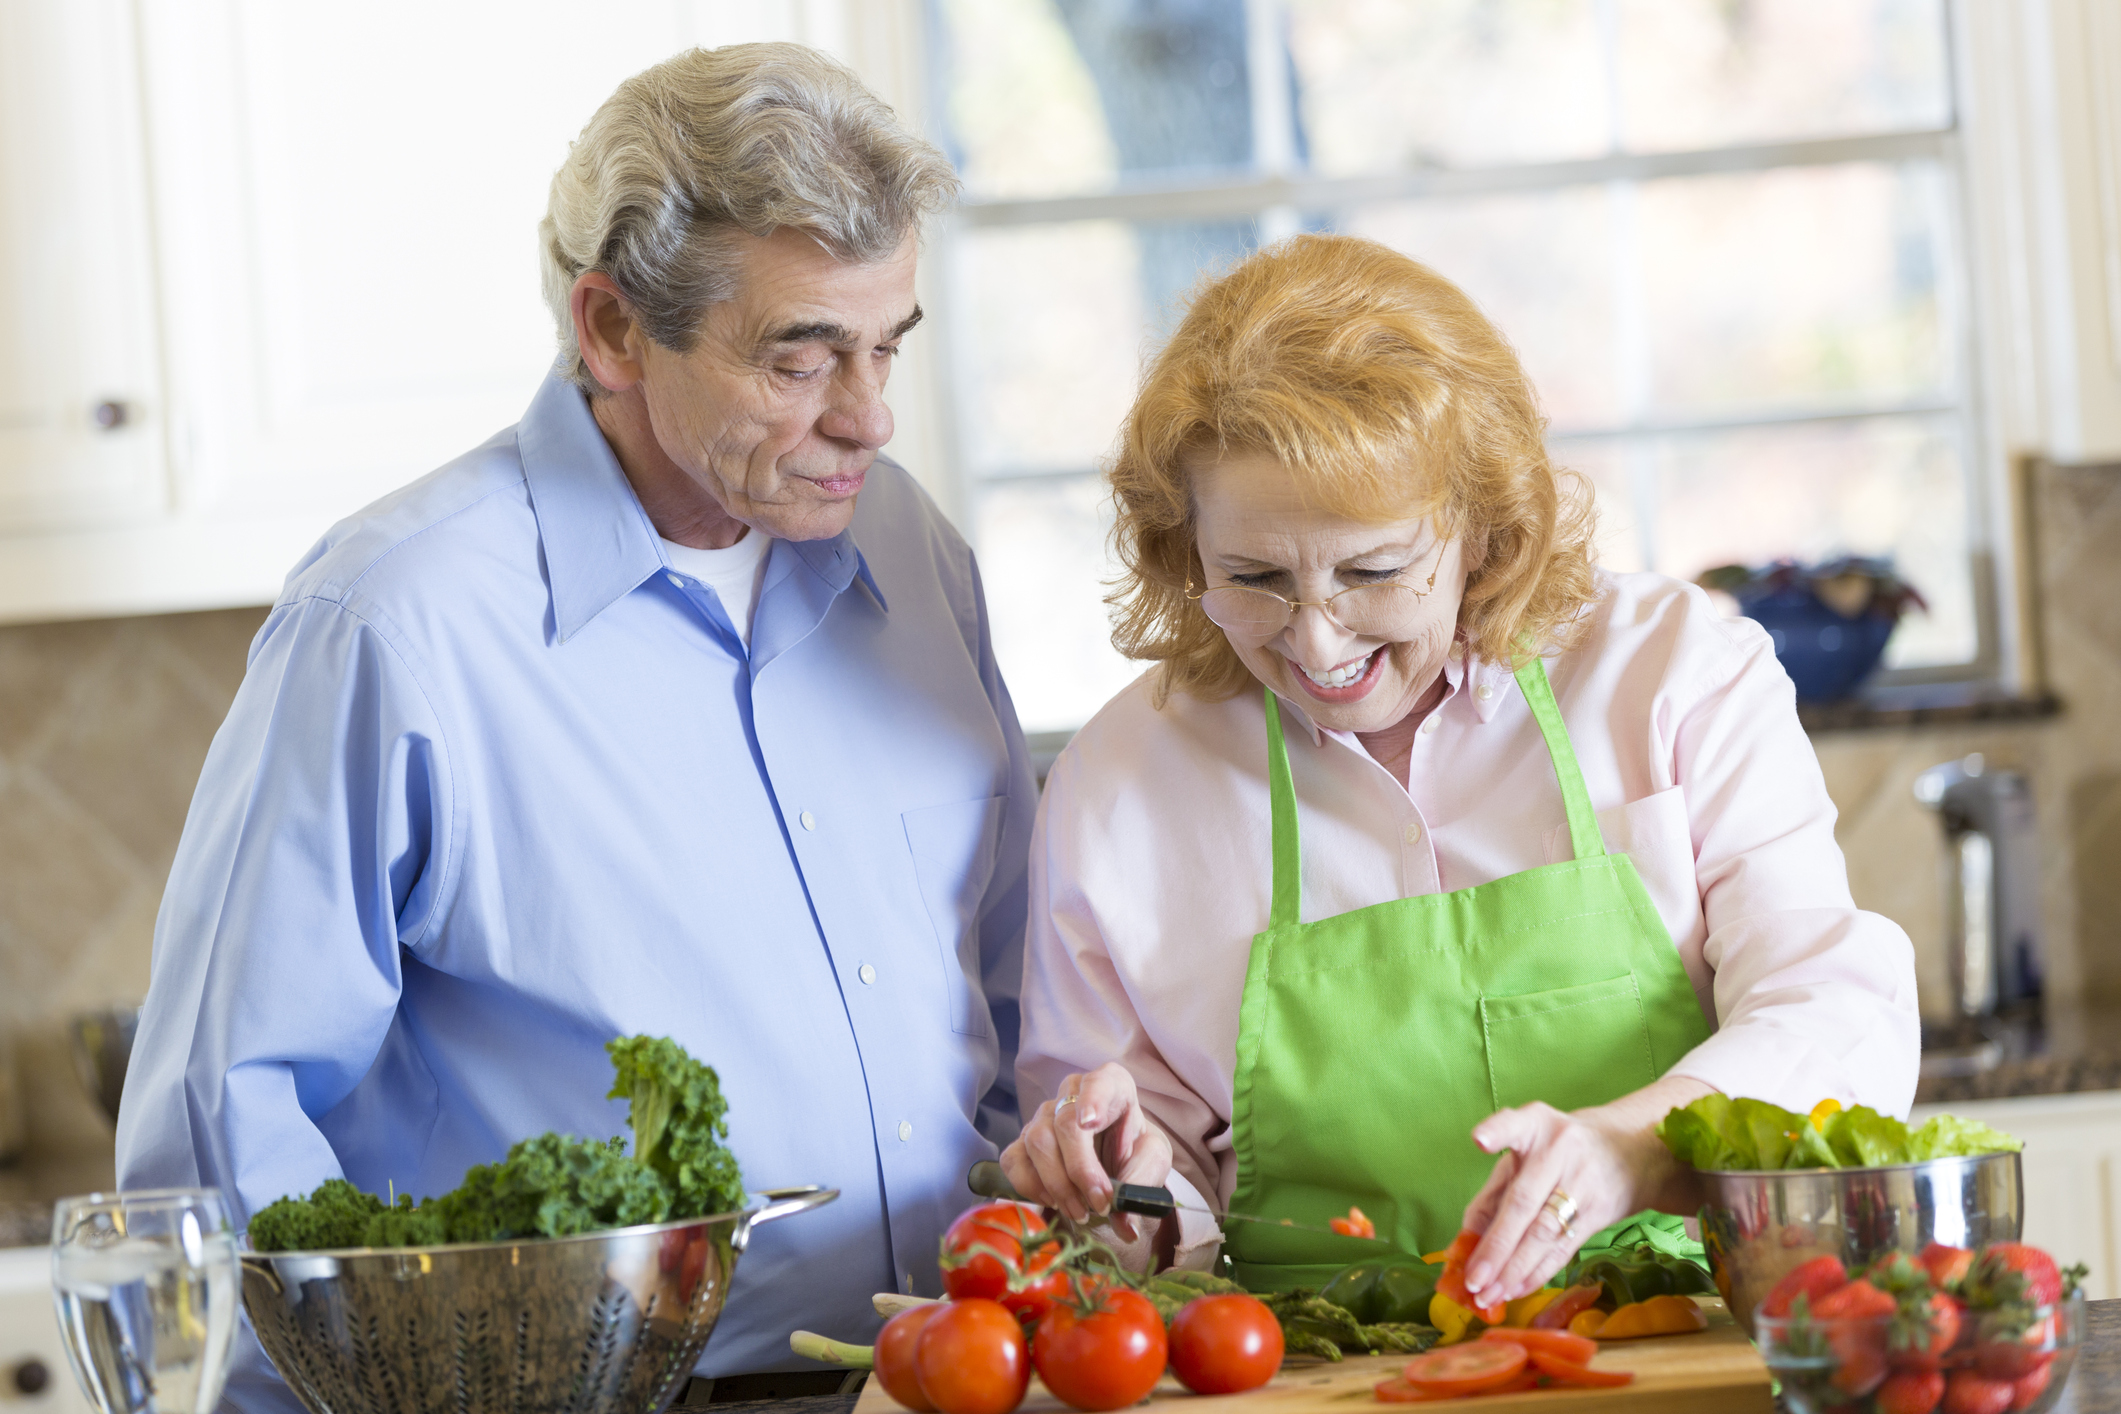 Couple prepares healthy meal together at home. (Getty Images)